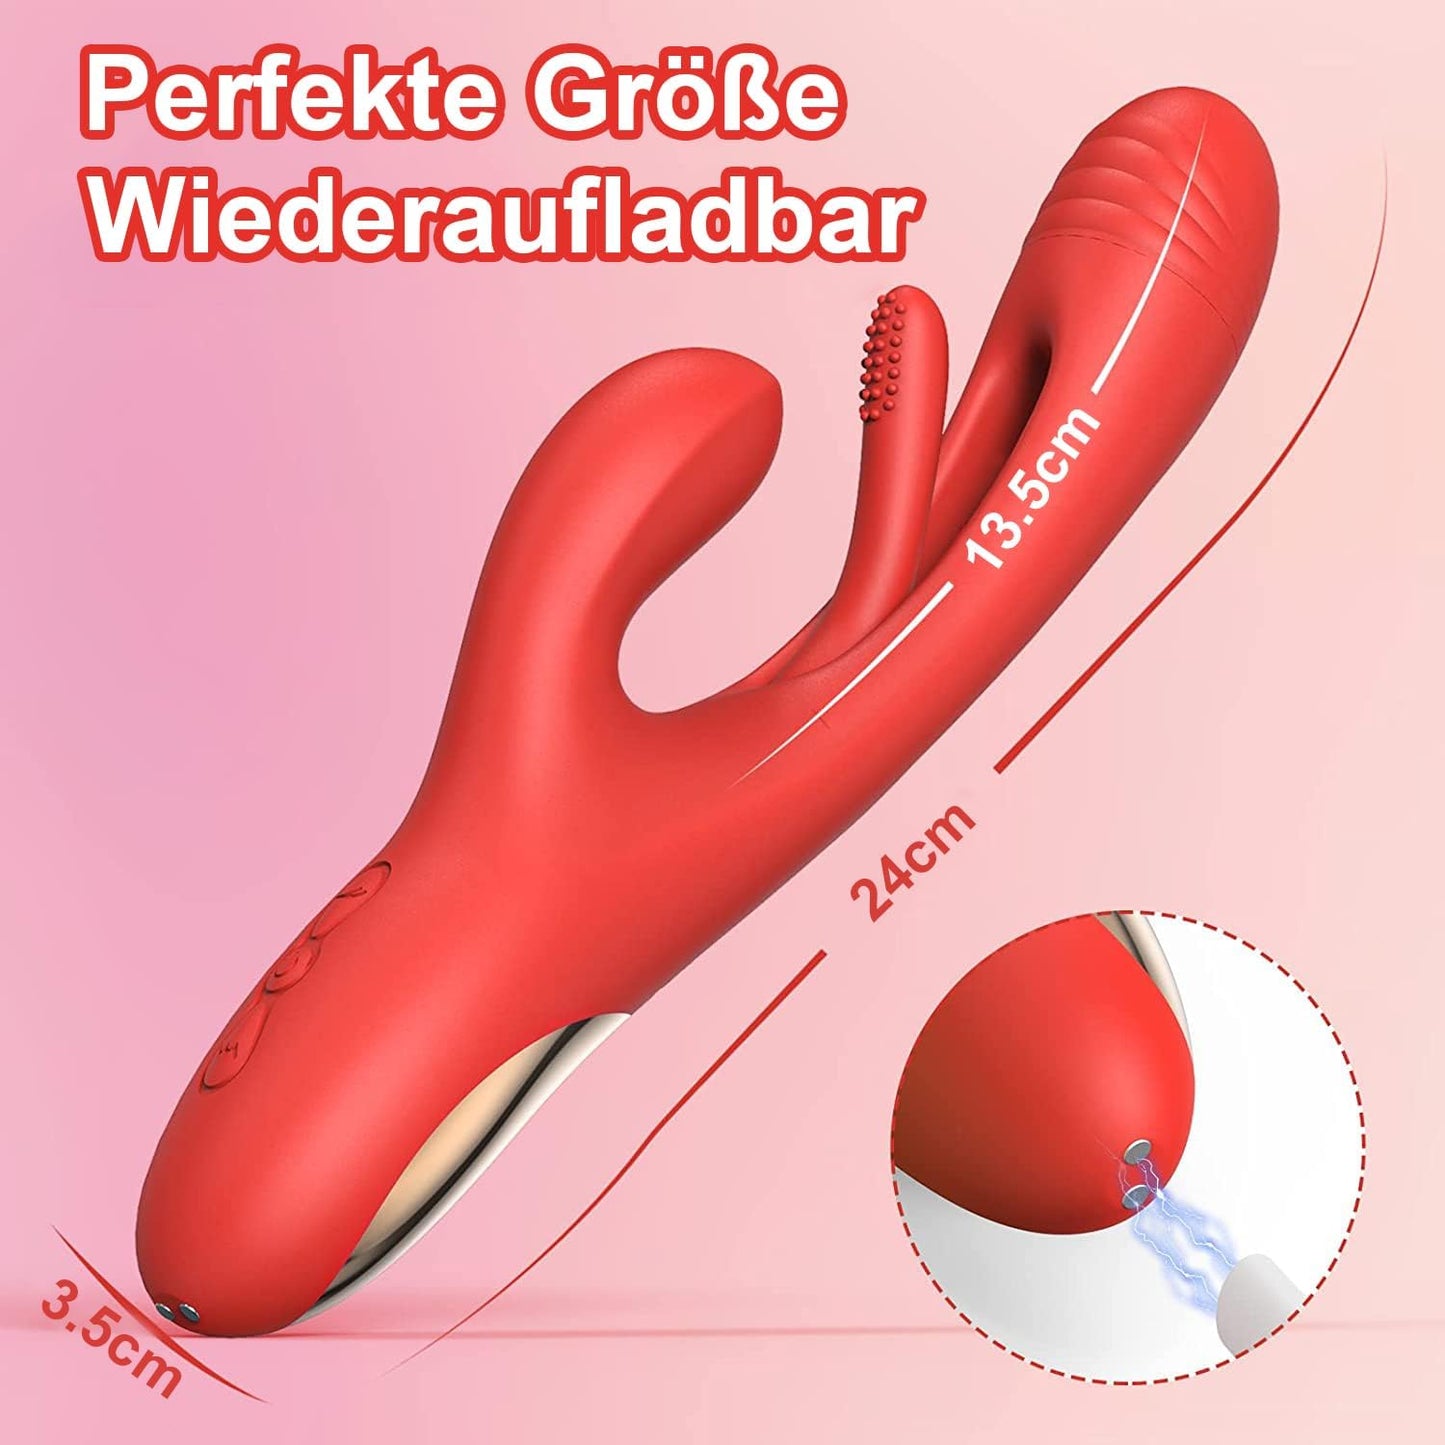 3 in 1 rabbit vibrators with 7 vibration and 7 flutter modes 